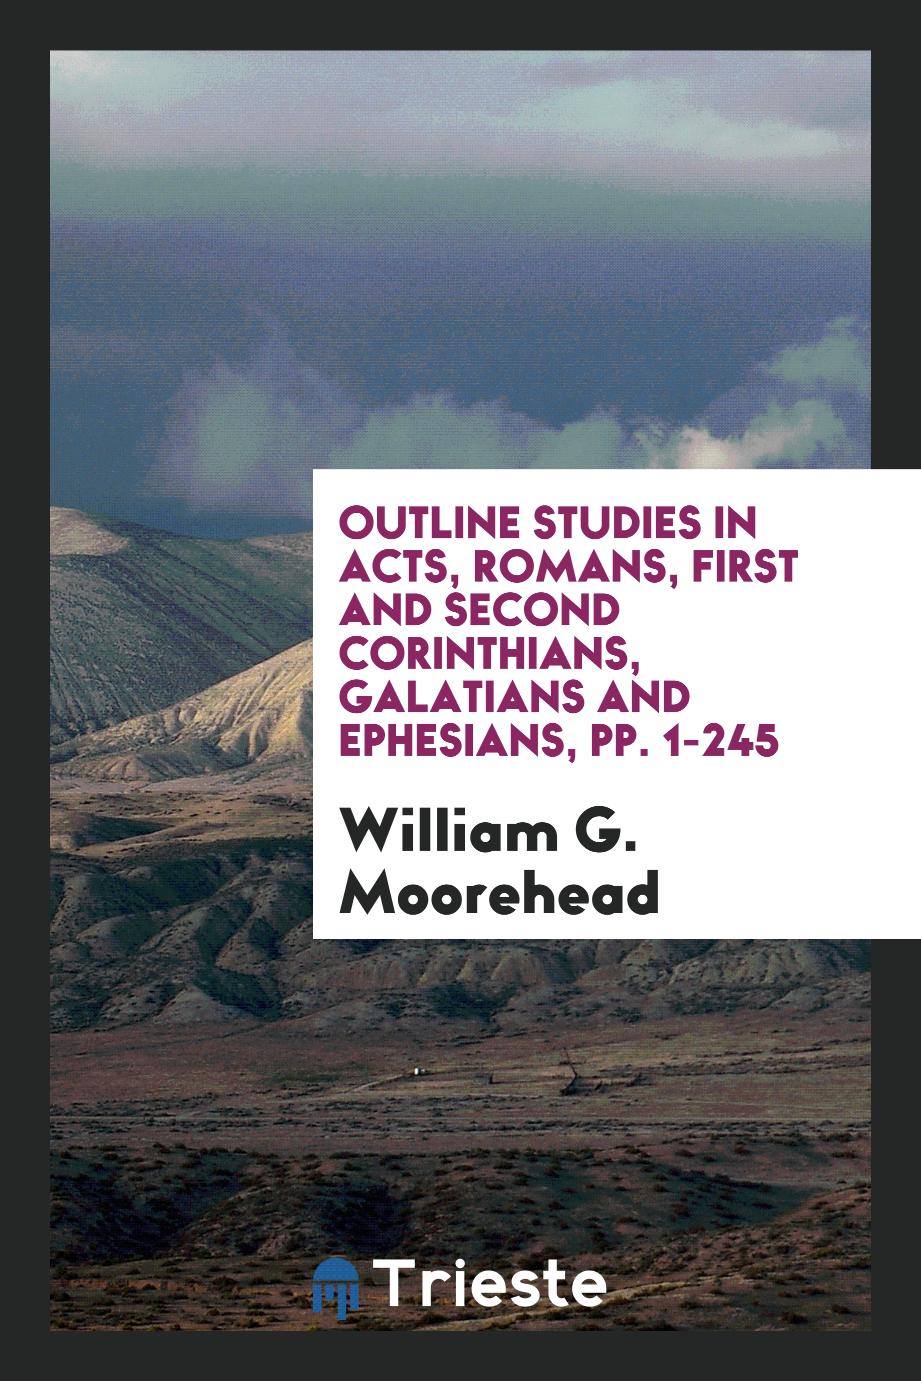 Outline Studies in Acts, Romans, First and Second Corinthians, Galatians and Ephesians, pp. 1-245